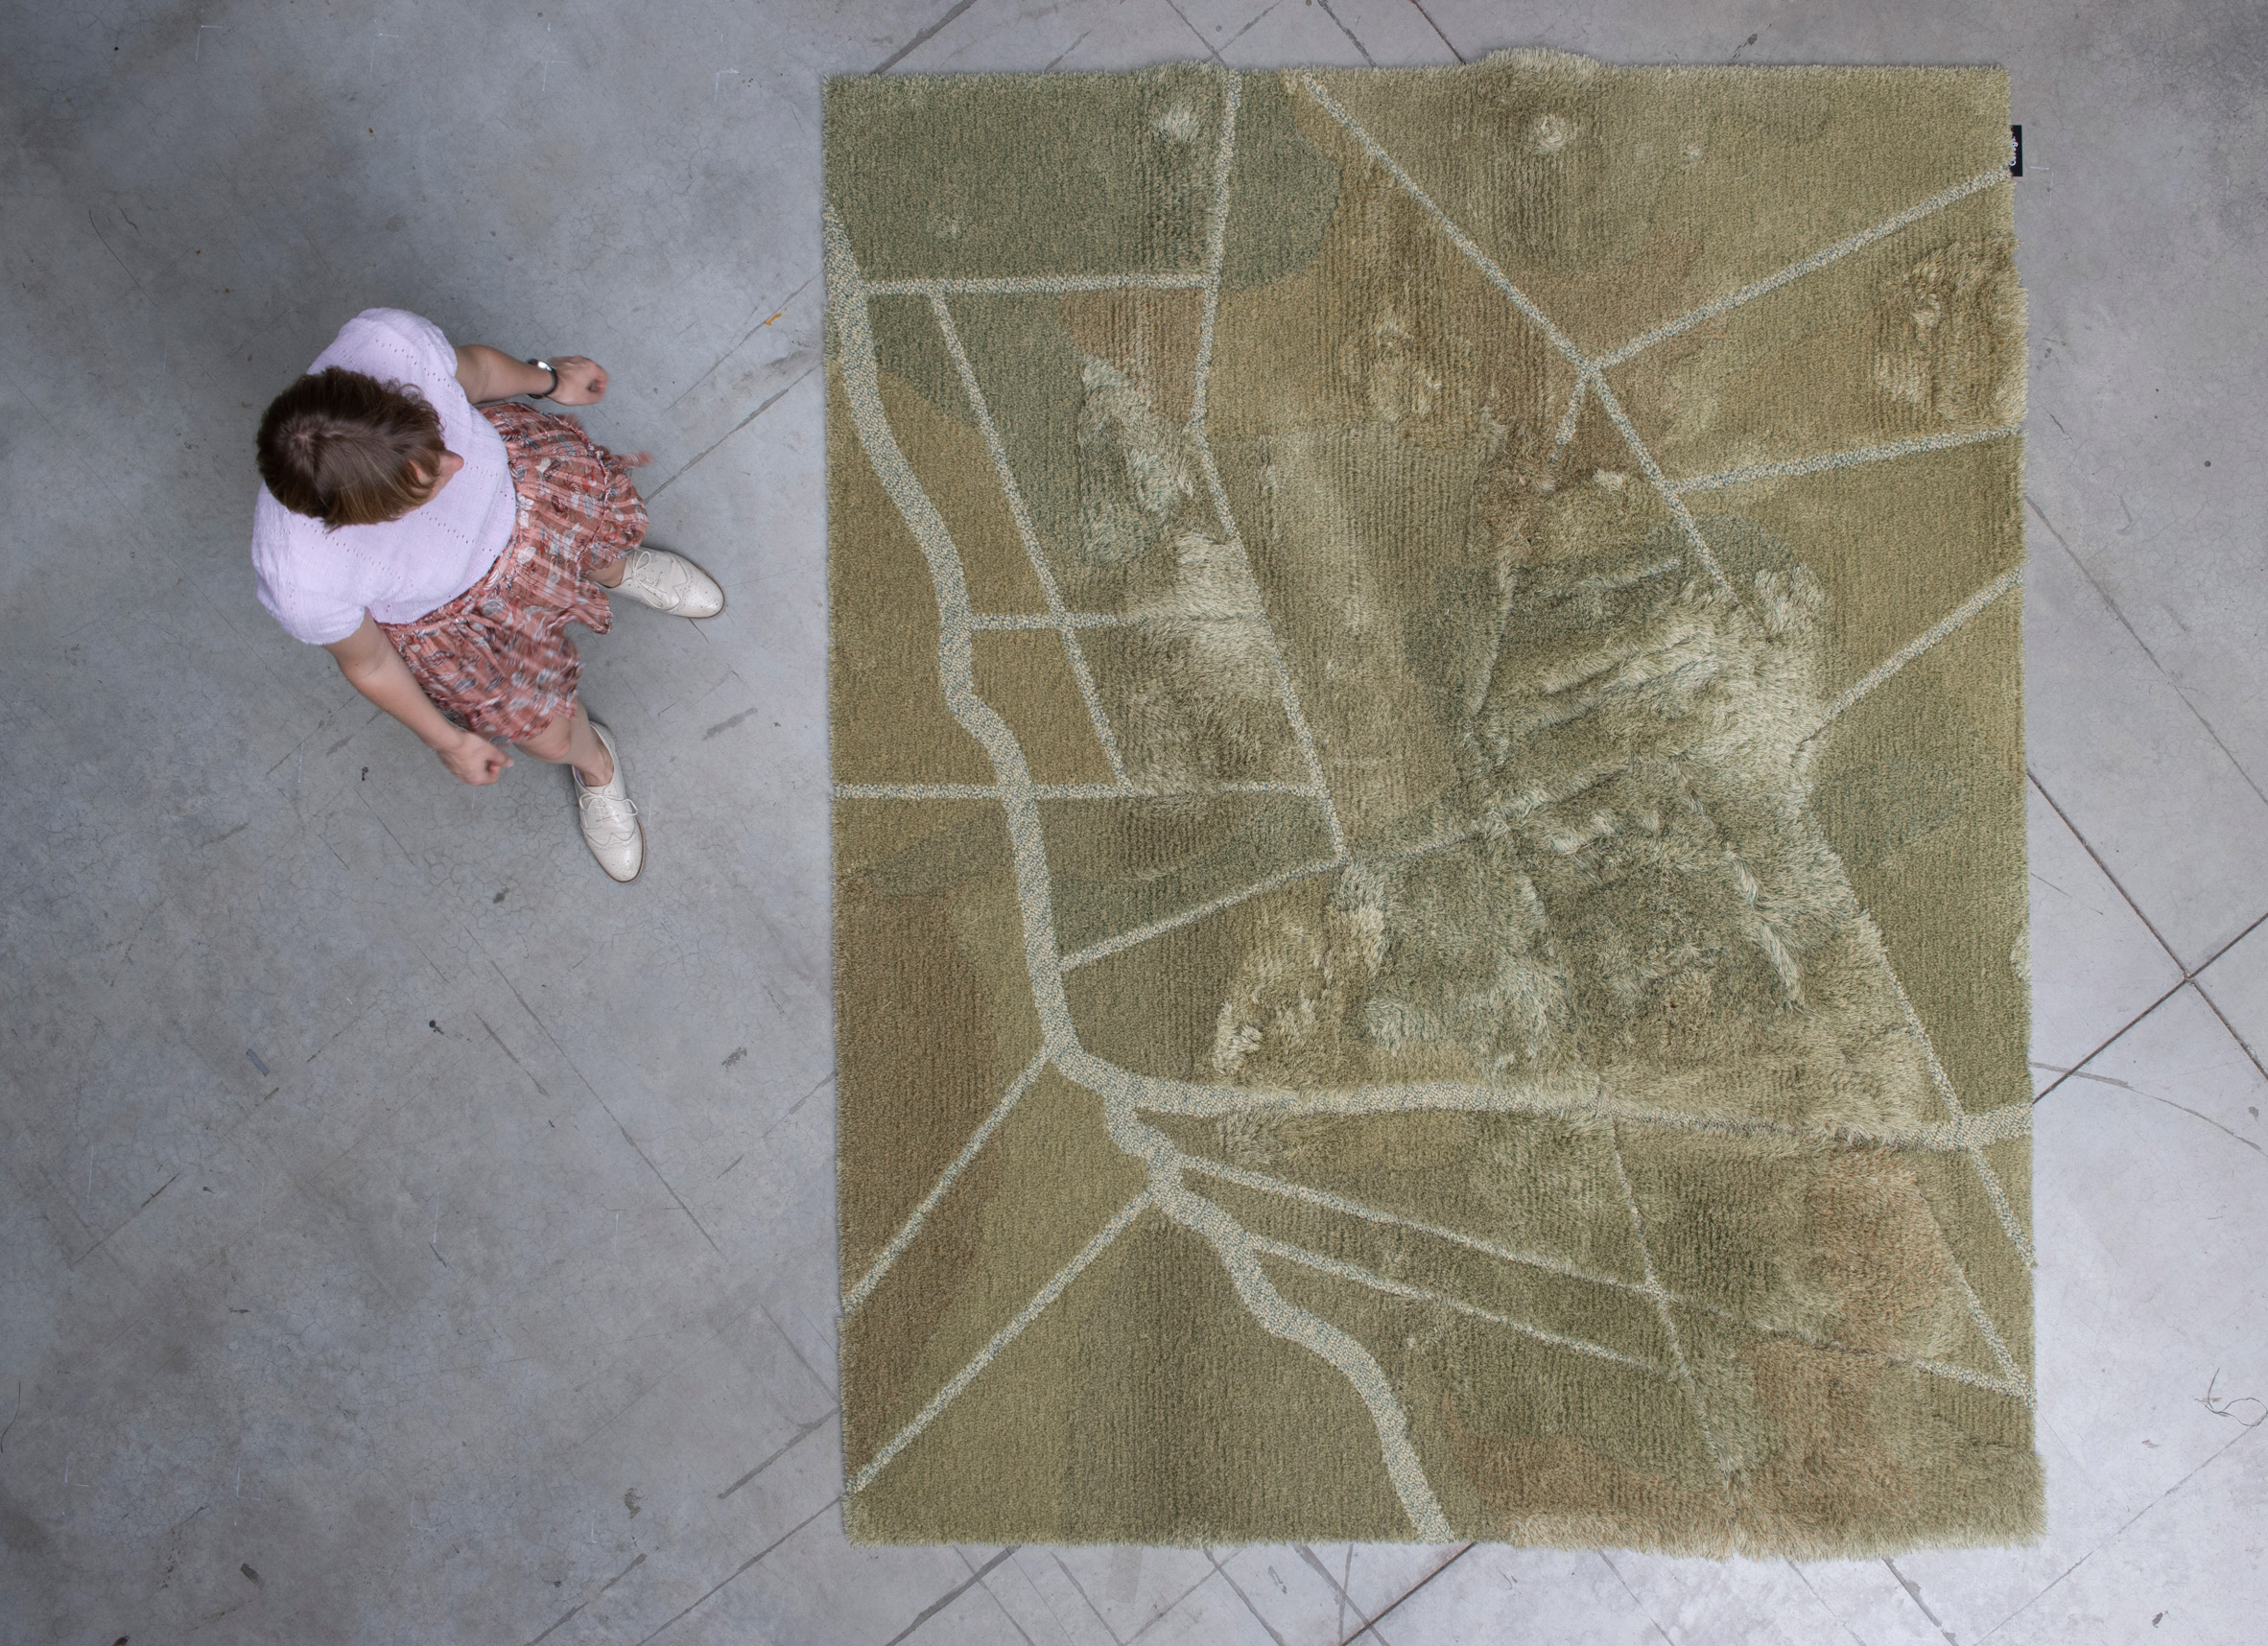 Aerial photo of Liselot Cobelens standing next to the Dryland rug showing pattern of canals in grassy fields